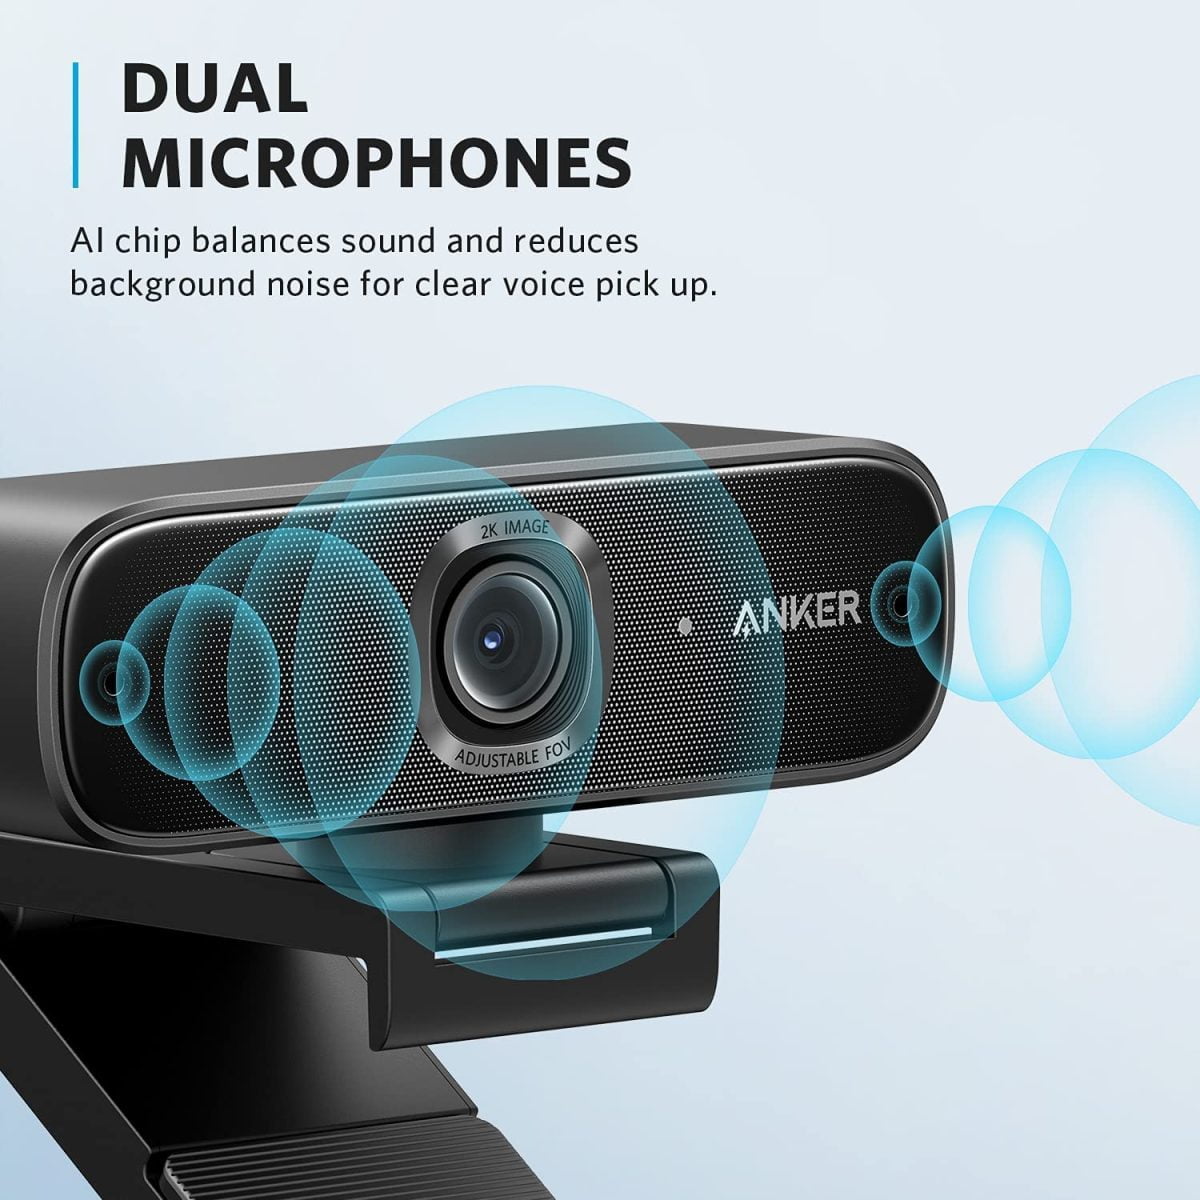 71Bdrmvy5Bl. Ac Sl1500 Anker &Lt;H1&Gt;Anker Webcam Powerconf C302&Lt;/H1&Gt; &Lt;B&Gt;Look Like A Pro:&Lt;/B&Gt;&Lt;Span Style=&Quot;Font-Weight: 400;&Quot;&Gt;Make A Great First Impression With Clients And Impress Your Boss With Powerconf C302’S Crisp Hd Webcam 2K/30Fps Camera With True-To-Life Colors.&Lt;/Span&Gt; &Lt;B&Gt;Clear Voice Pickup:&Lt;/B&Gt;&Lt;Span Style=&Quot;Font-Weight: 400;&Quot;&Gt;Be Heard Loud And Clear Via Hd Webcam While Working From Home Thanks To The Ultra-Sensitive Dual Microphones.&Lt;/Span&Gt; &Lt;B&Gt;Shine Bright In Low Light:&Lt;/B&Gt;&Lt;Span Style=&Quot;Font-Weight: 400;&Quot;&Gt;When Working Late Or Calling Clients In Different Time Zones, The Hd Webcam’s&Lt;/Span&Gt;&Lt;Span Style=&Quot;Font-Weight: 400;&Quot;&Gt; Ai-Powered A&Lt;/Span&Gt;&Lt;Span Style=&Quot;Font-Weight: 400;&Quot;&Gt;Uto Low-Light Correction Kicks In To Ensure You Stand Out, Even In Poor Lighting Conditions.&Lt;/Span&Gt; &Lt;B&Gt;Fit Everyone In Frame:&Lt;/B&Gt;&Lt;Span Style=&Quot;Font-Weight: 400;&Quot;&Gt;Whether You’re Calling Solo From Home Or Huddled With Colleagues In The Office, Our Revolutionary Ai Technology Automatically Adjusts The Field Of View Depending On The Number Of People In Your Meeting.&Lt;/Span&Gt; &Lt;B&Gt;No Time Wasted:&Lt;/B&Gt;&Lt;Span Style=&Quot;Font-Weight: 400;&Quot;&Gt;Automatically Focuses On People Or Objects Within Just 0.35 Seconds.&Lt;/Span&Gt;&Lt;Span Style=&Quot;Font-Weight: 400;&Quot;&Gt;Use Auto-Focus Ai&Lt;/Span&Gt;&Lt;Span Style=&Quot;Font-Weight: 400;&Quot;&Gt; To Show Off Every Detail Of Your Latest Samples And Prototypes Without Waiting For The Focus To Catch Up.&Lt;/Span&Gt; Warranty: Anker Product Warranty Anker Webcam Anker Webcam Powerconf C302